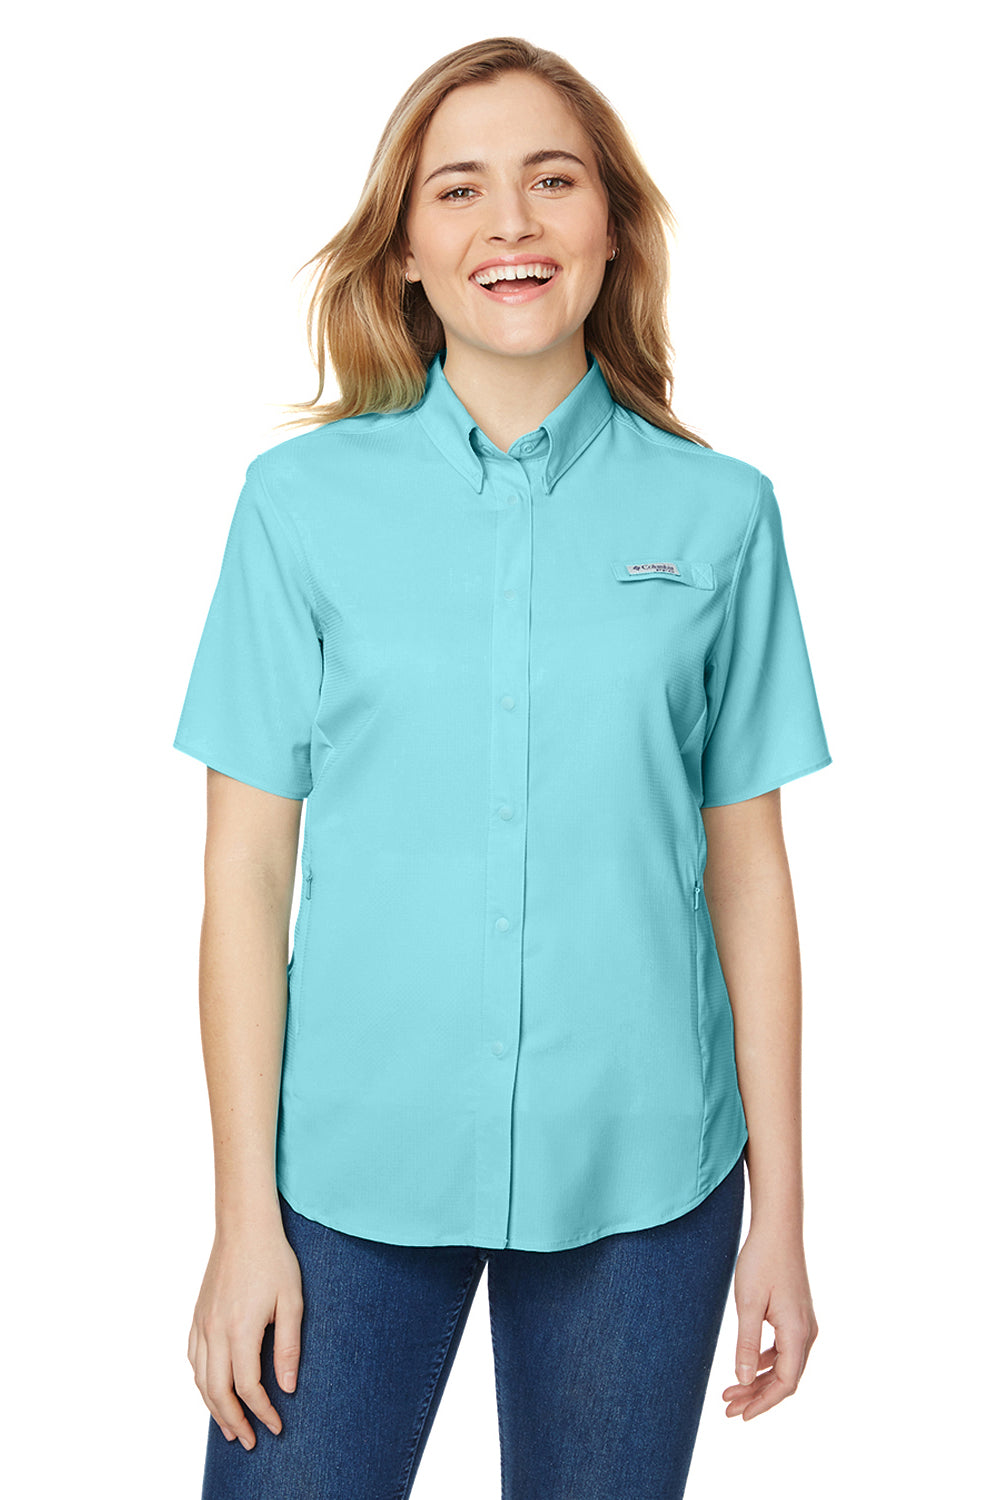 columbia short sleeve button down